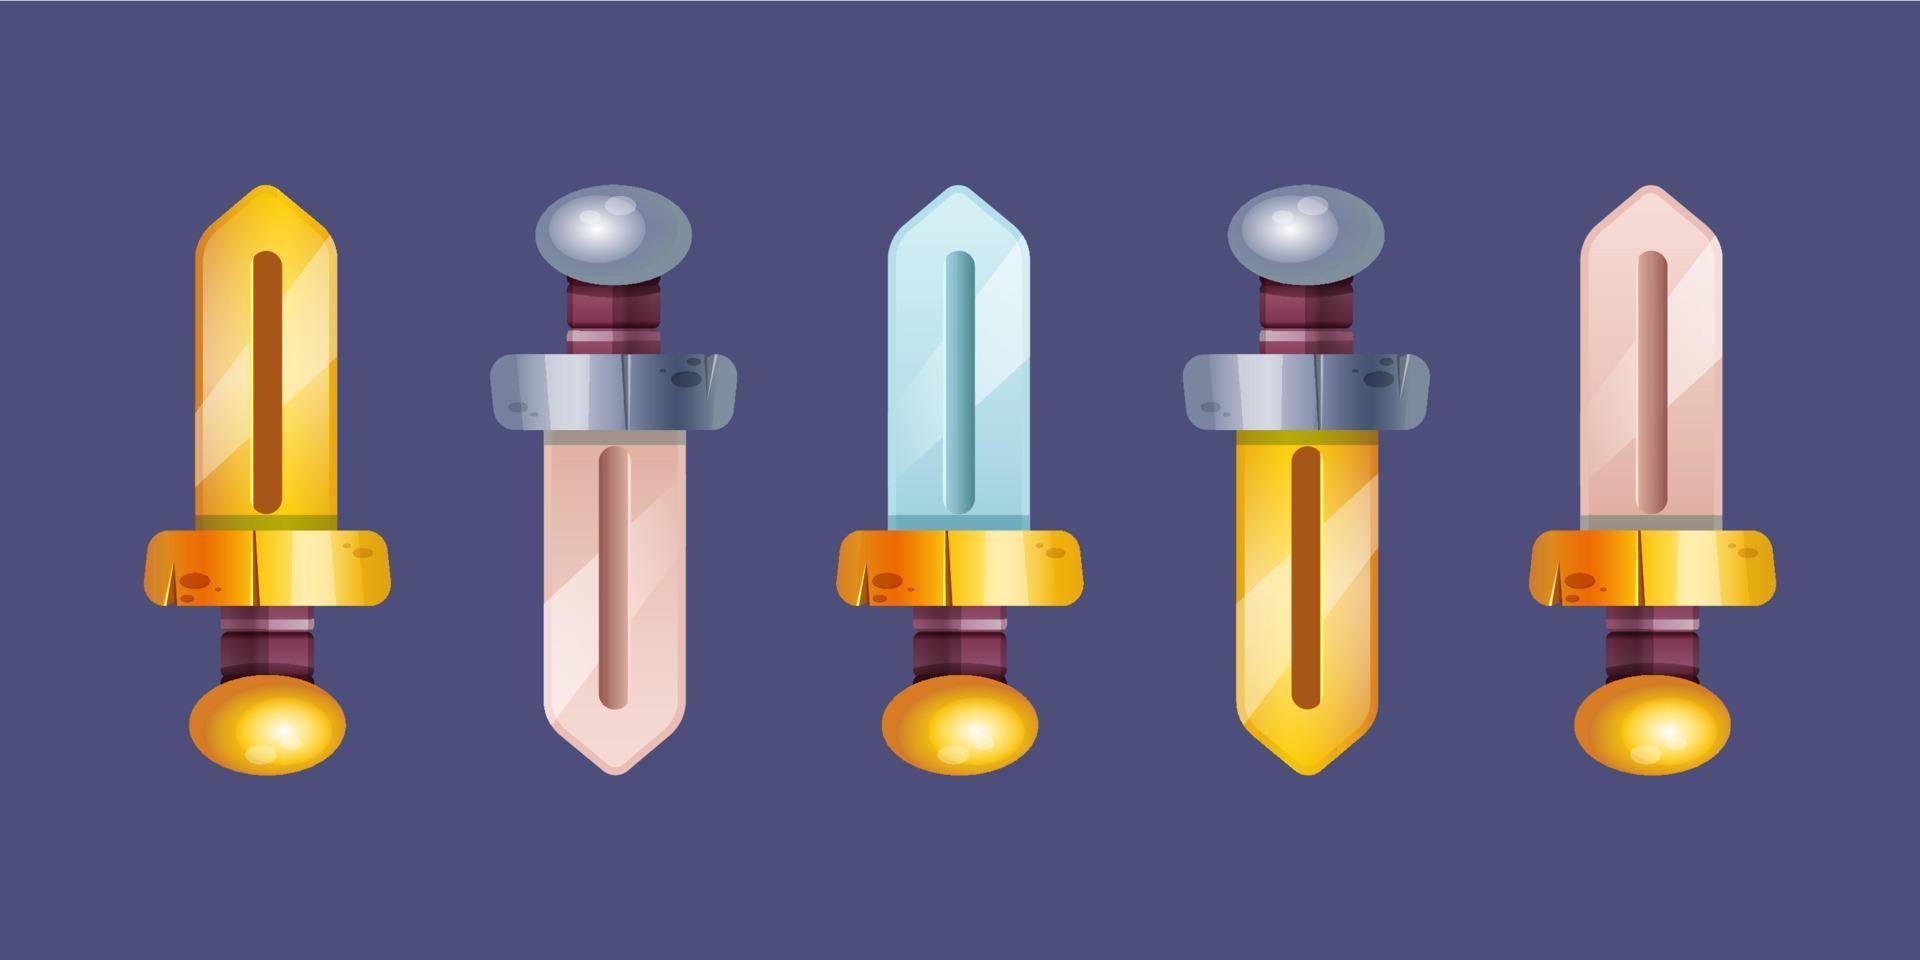 Game icons of swords, medieval weapons vector